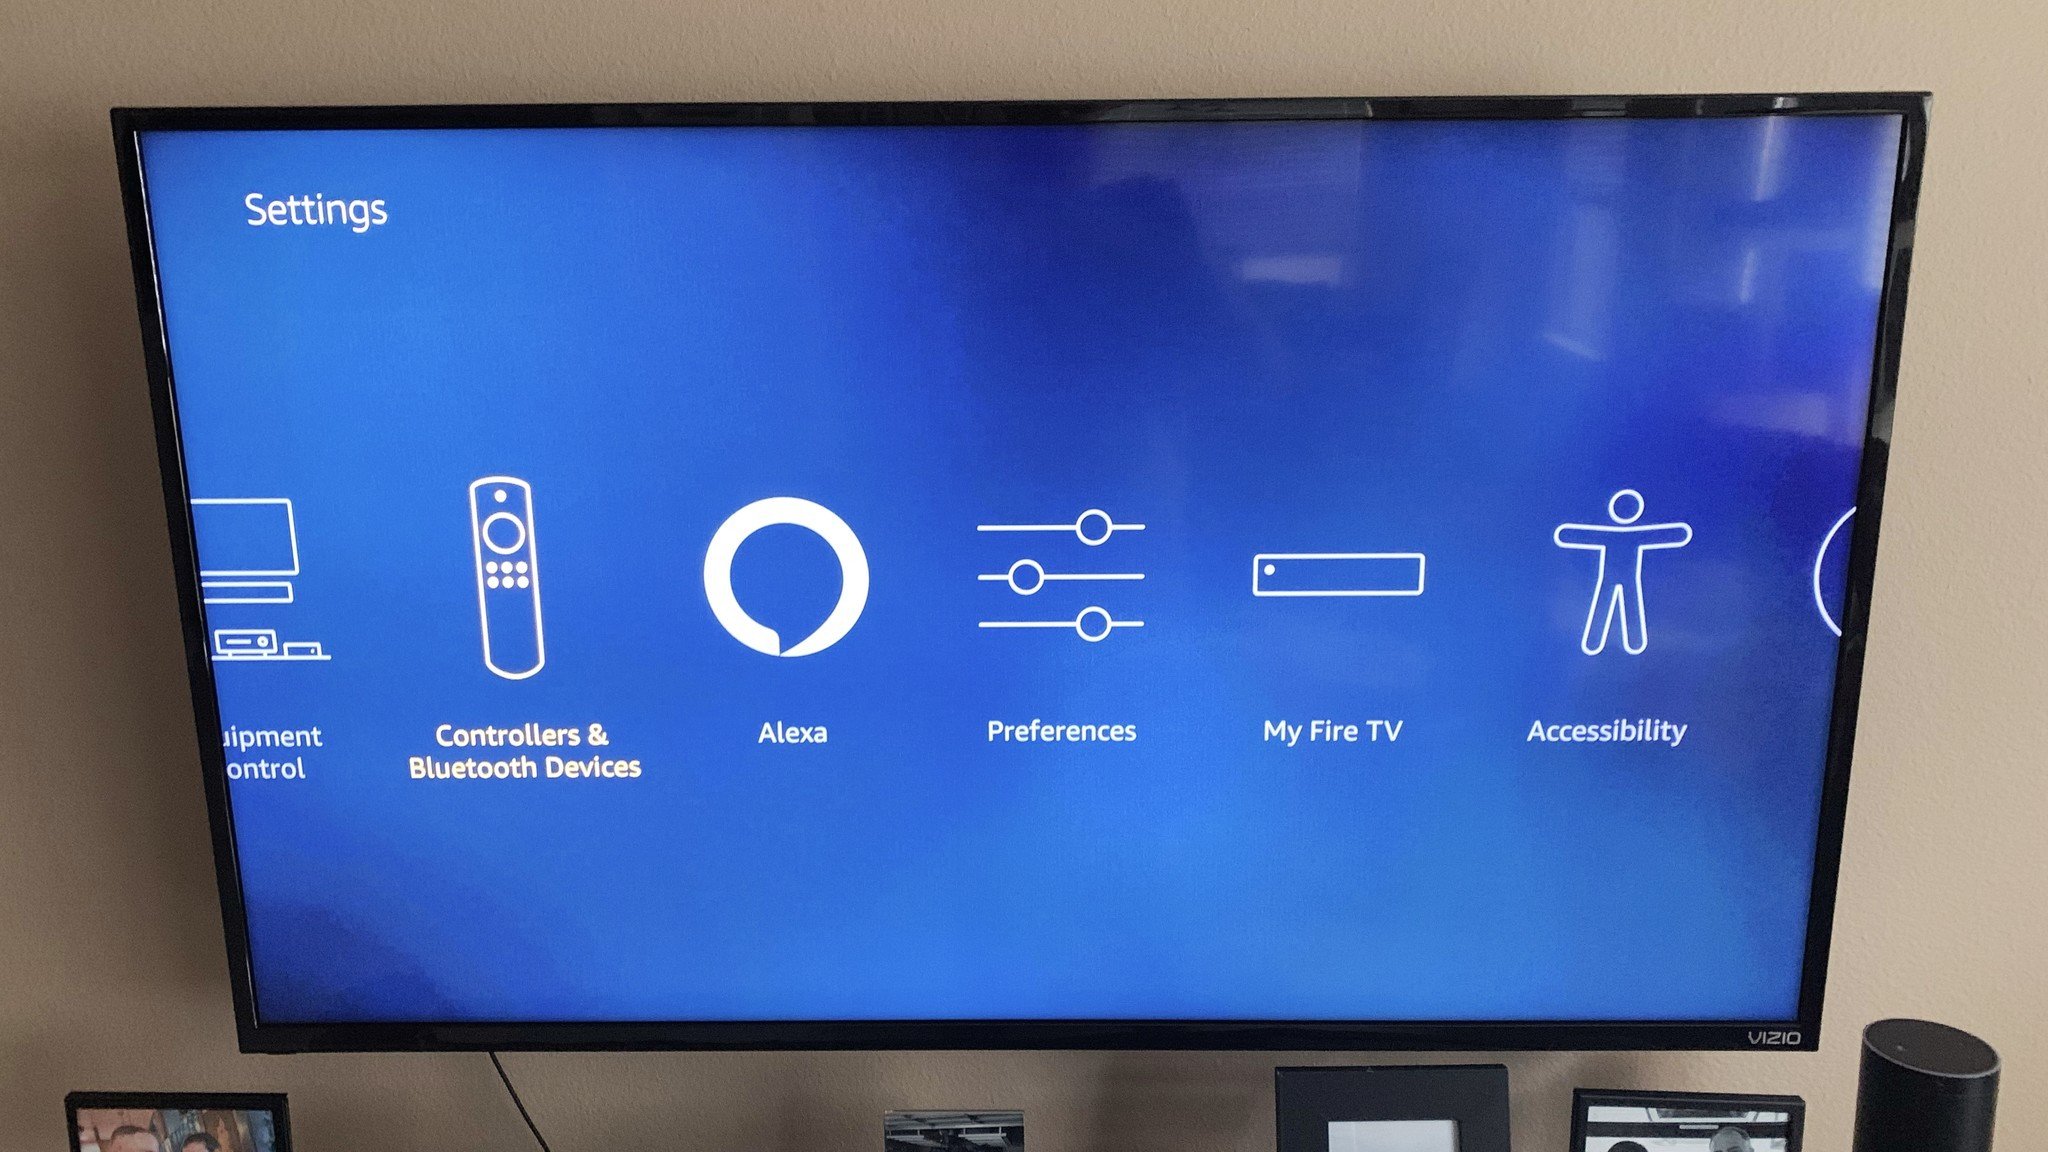 Fire TV Controllers & Bluetooth Devices